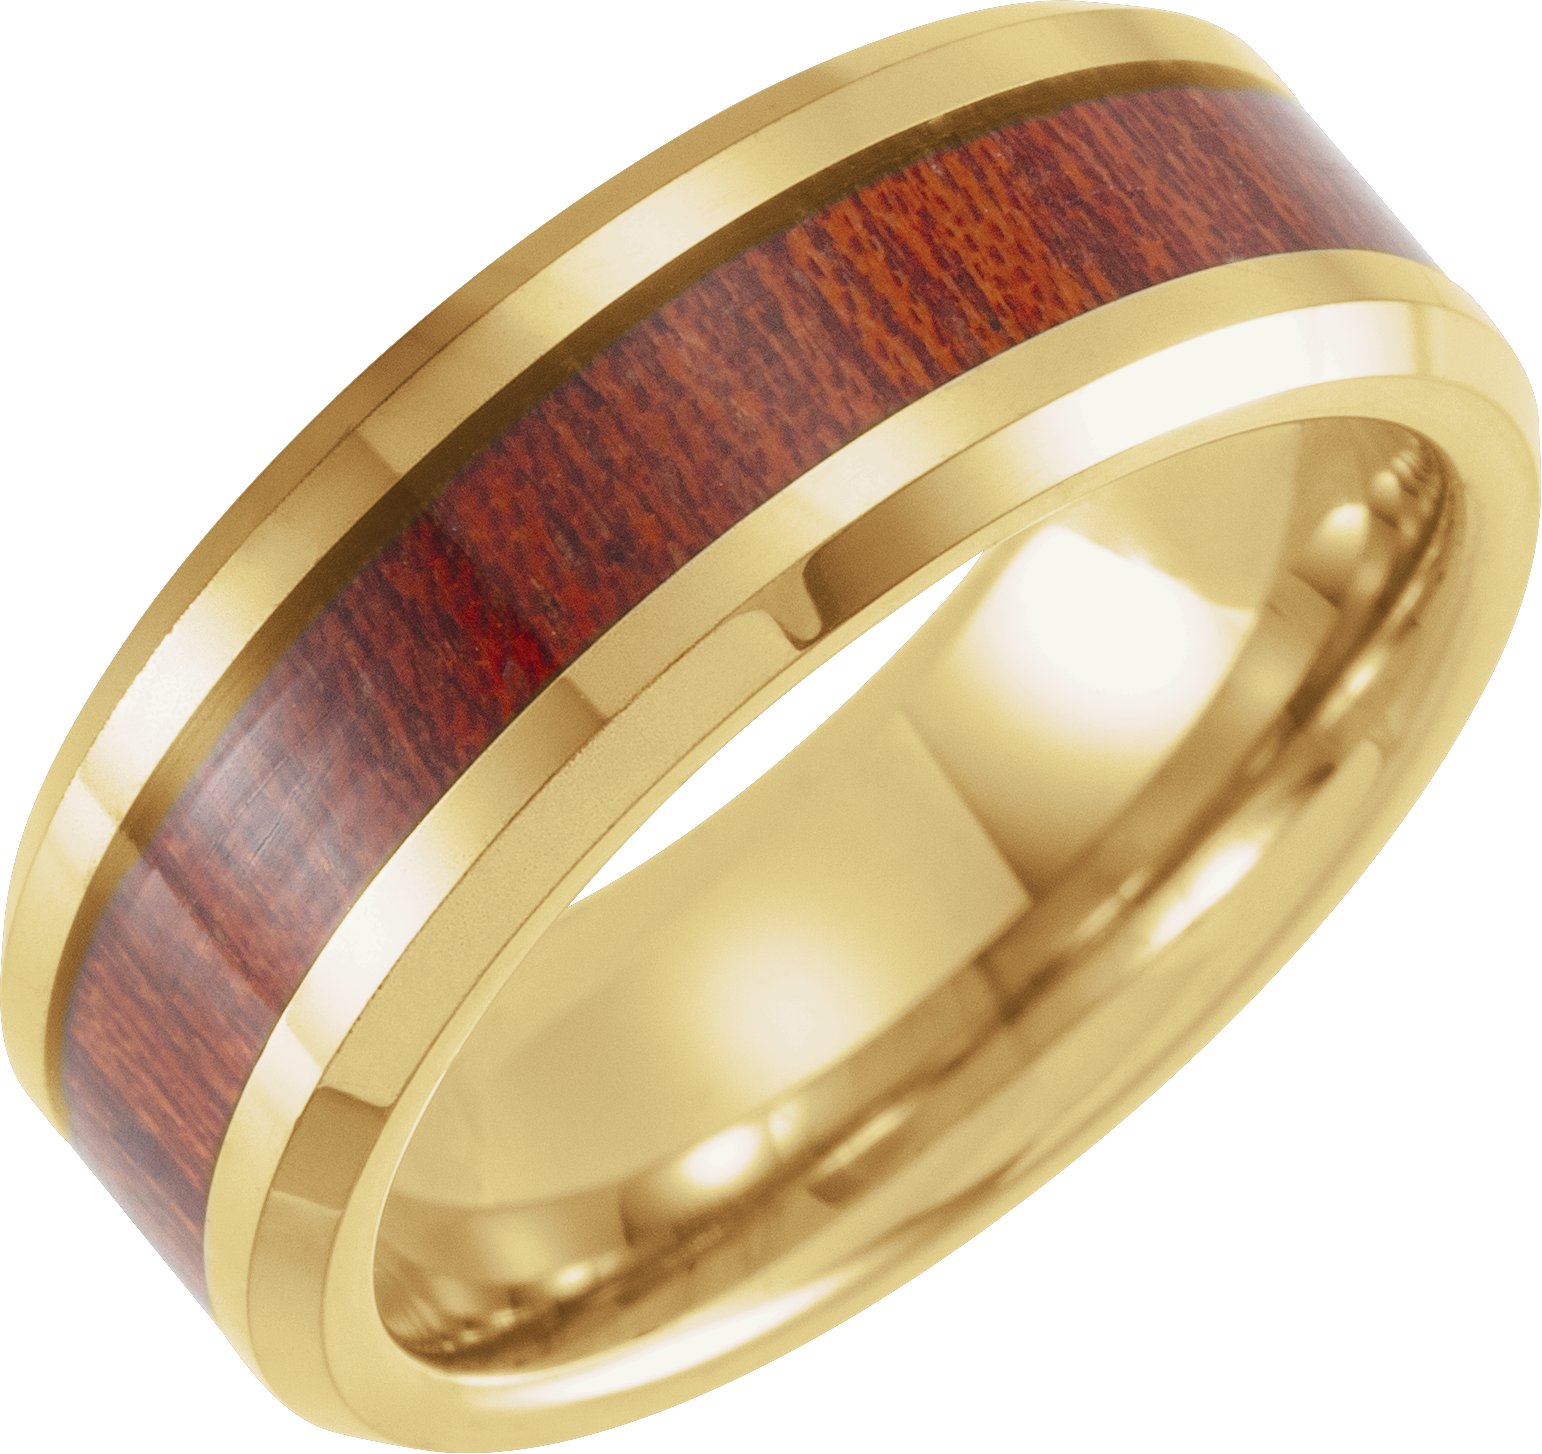 18K Yellow Gold PVD Tungsten 8 mm Beveled Band with Walnut Wood Inlay Size 9.5